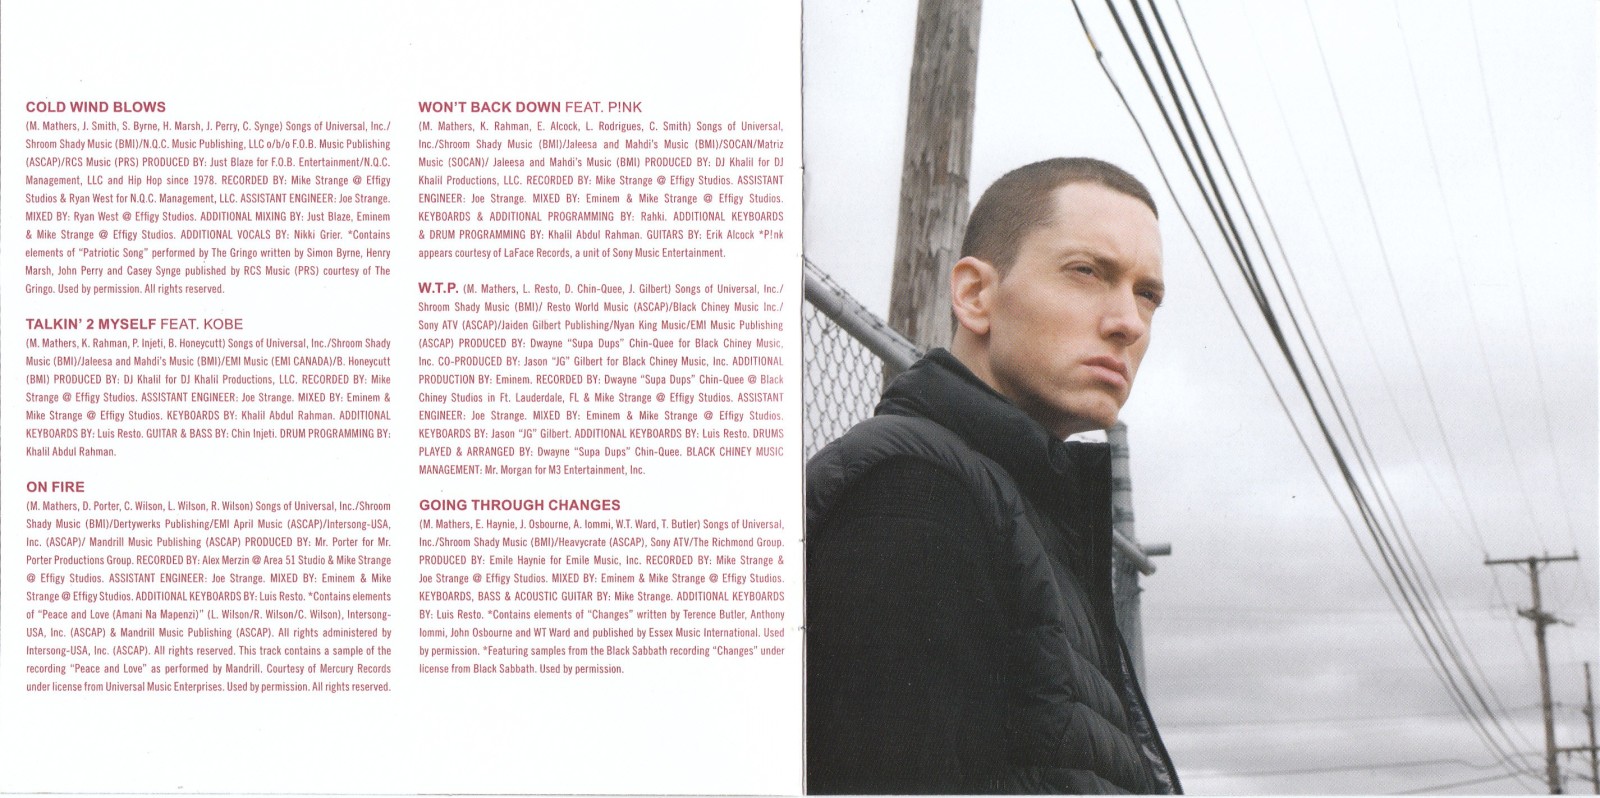 Eminem – Recovery (Booklet Scans) | HipHop-N-More1600 x 798